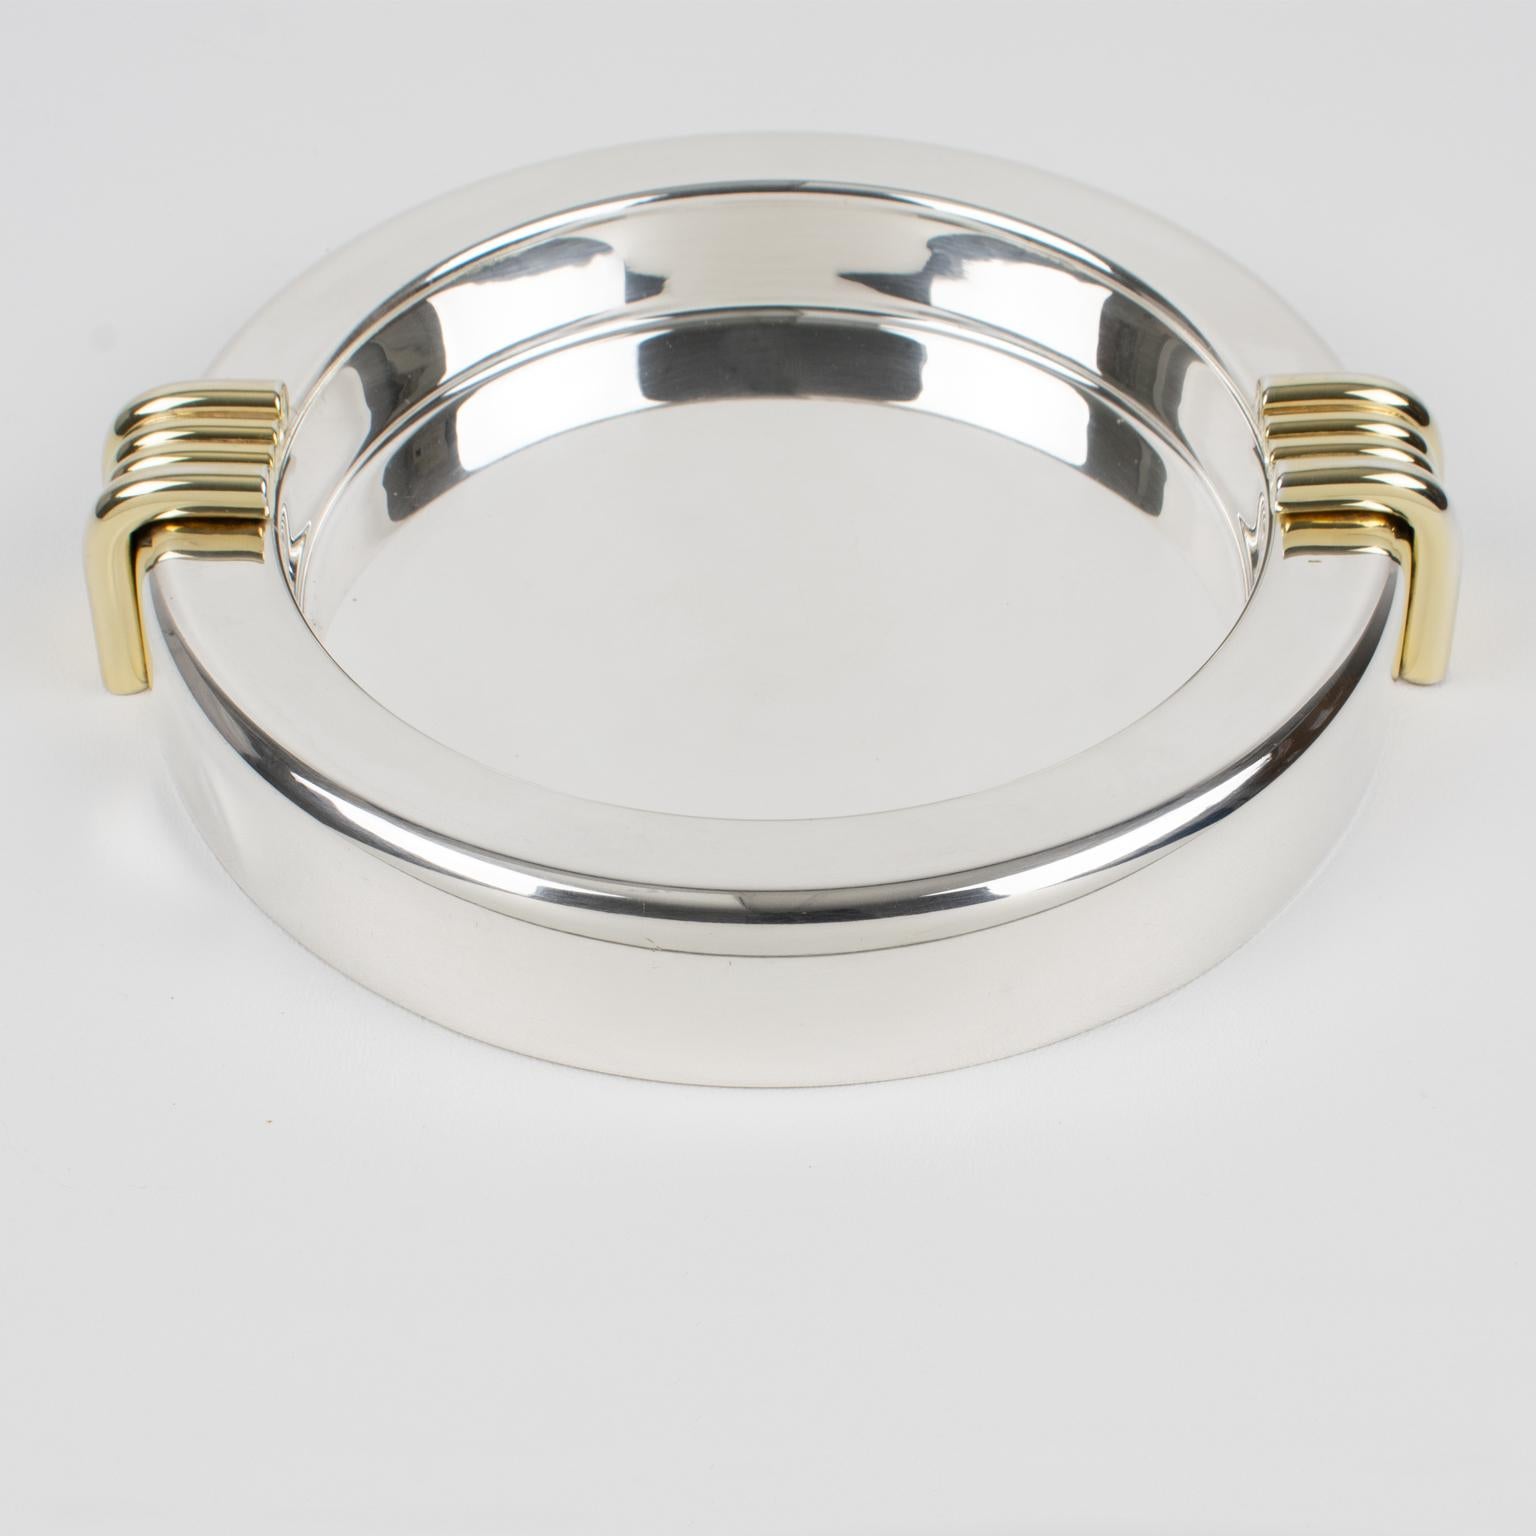 Mid-Century Modern Christian Dior Silver Plate and Gold Plate Cigar Ashtray Vide Poche Catchall For Sale